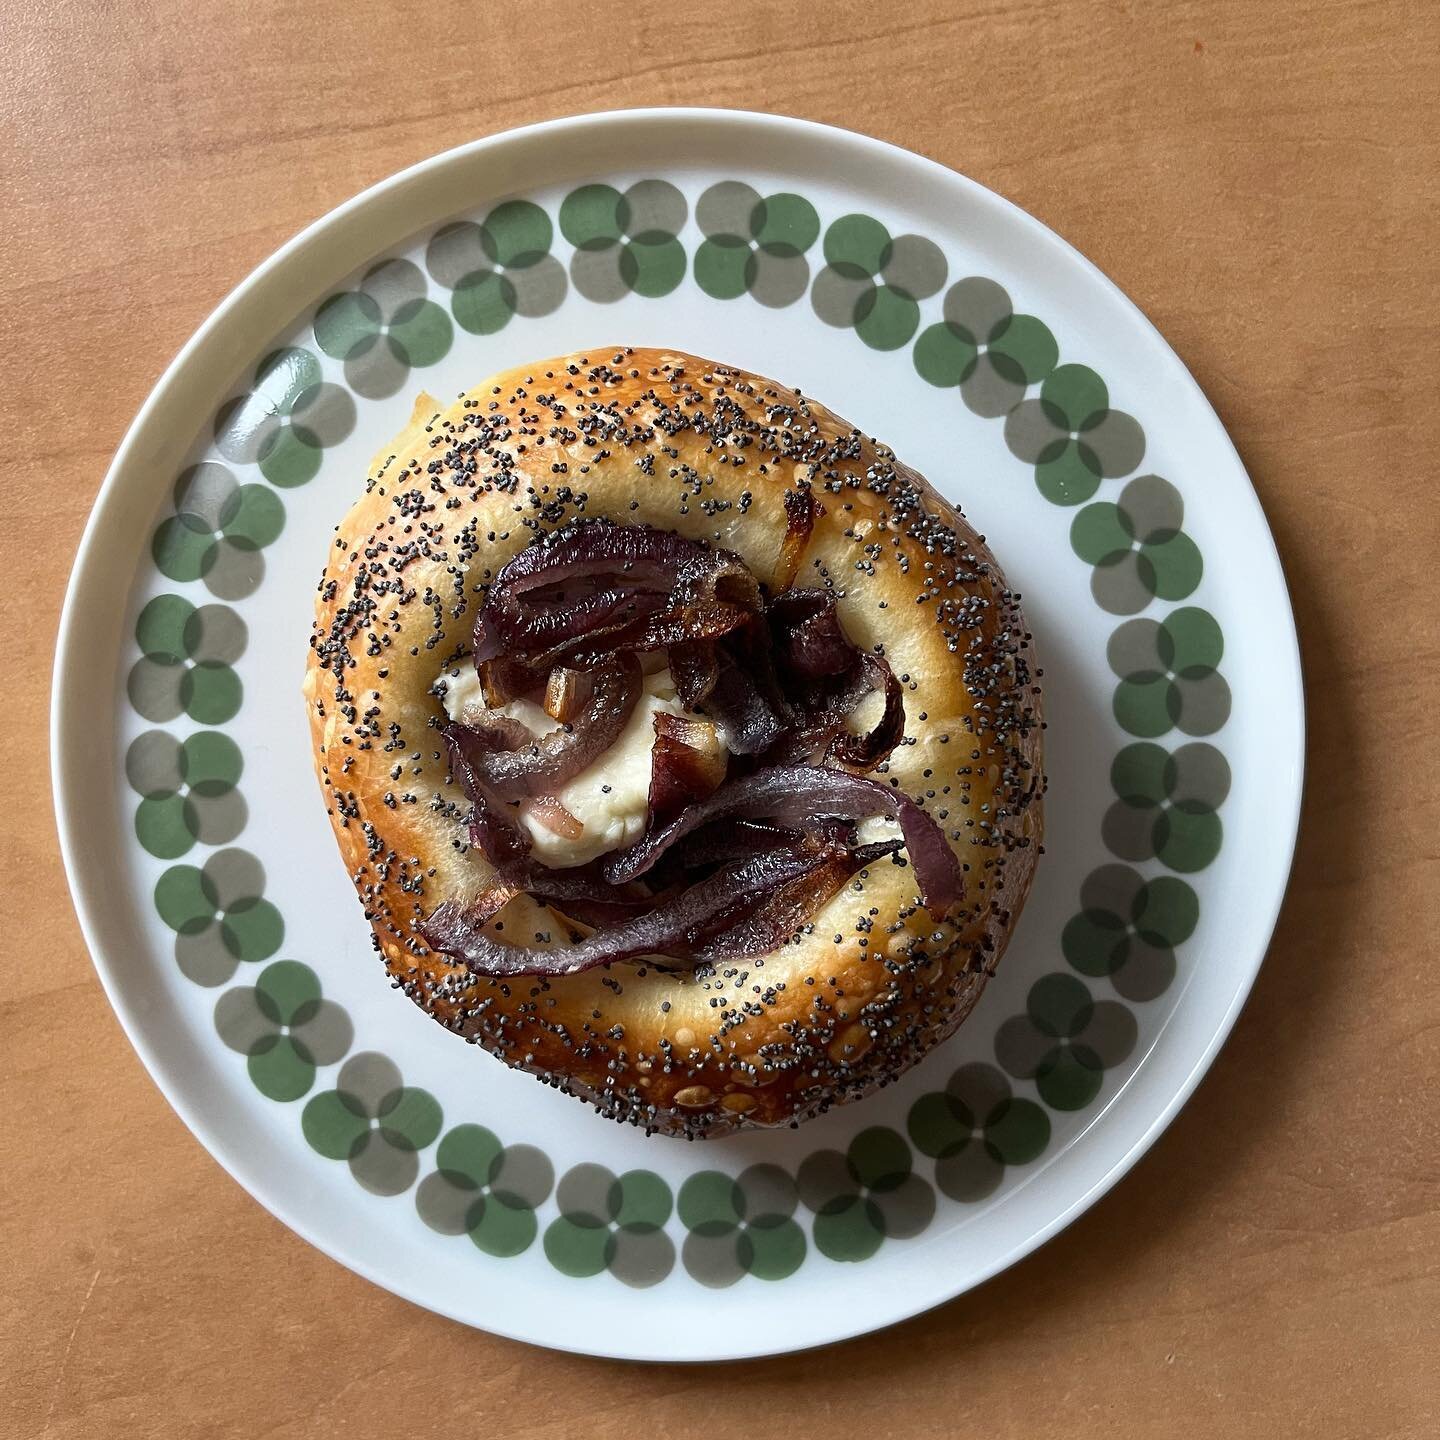 Friday. 12-3pm. 801 St. Clarens. 

Our take on a bialy with schmear that you won&rsquo;t want to miss! We&rsquo;ll also have Challahs, Sourdoughs, Babkas and some laughs! So bring your buds! Bring your babies and bring your appetites!